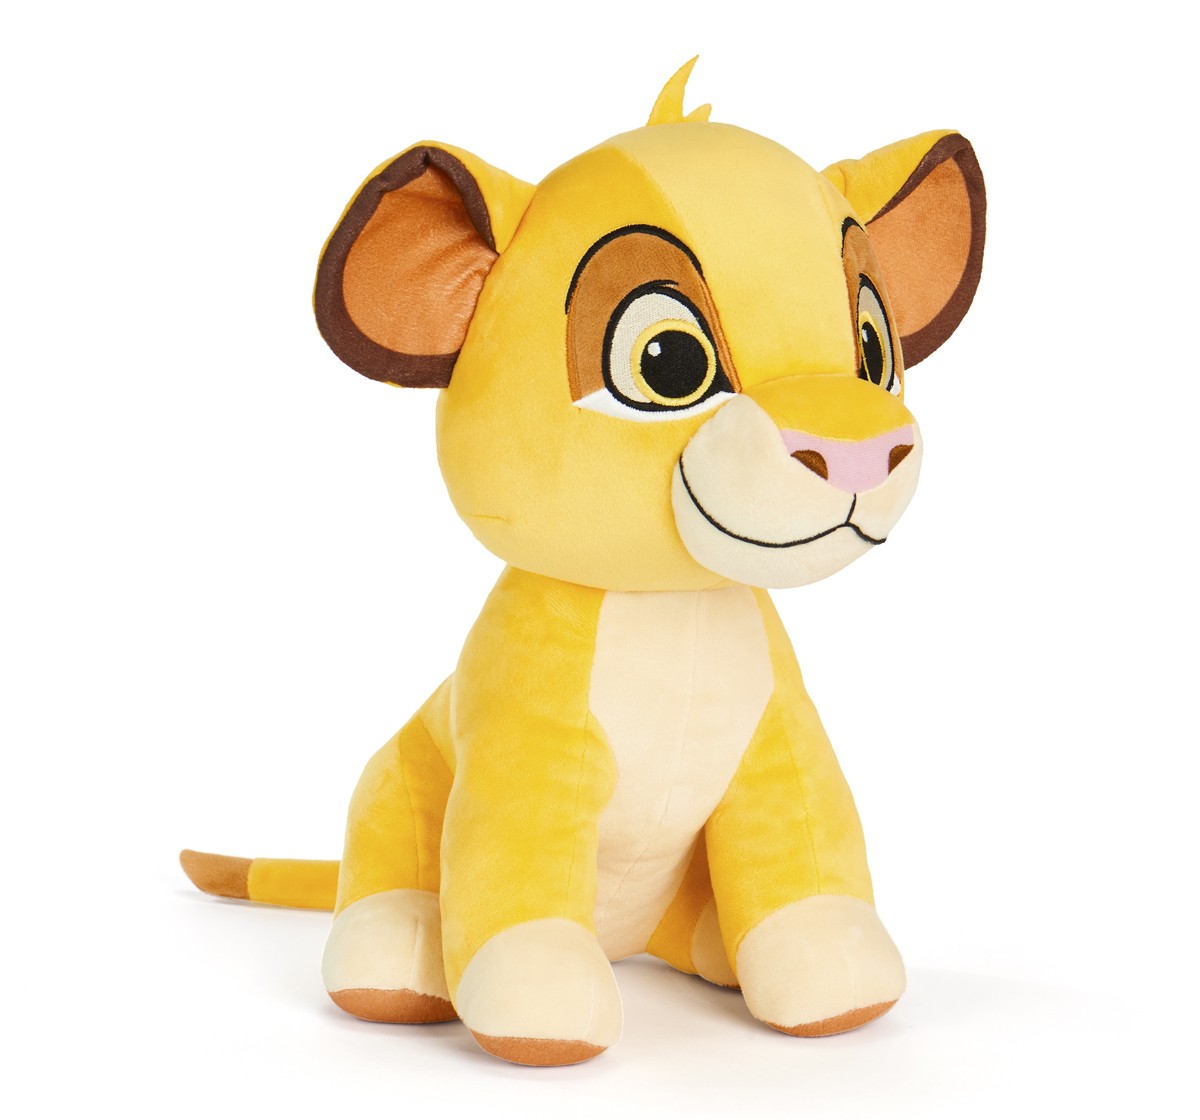 Disney Classic Simba 12 Inch Soft Toy for Kids, Multicolor 2Y+